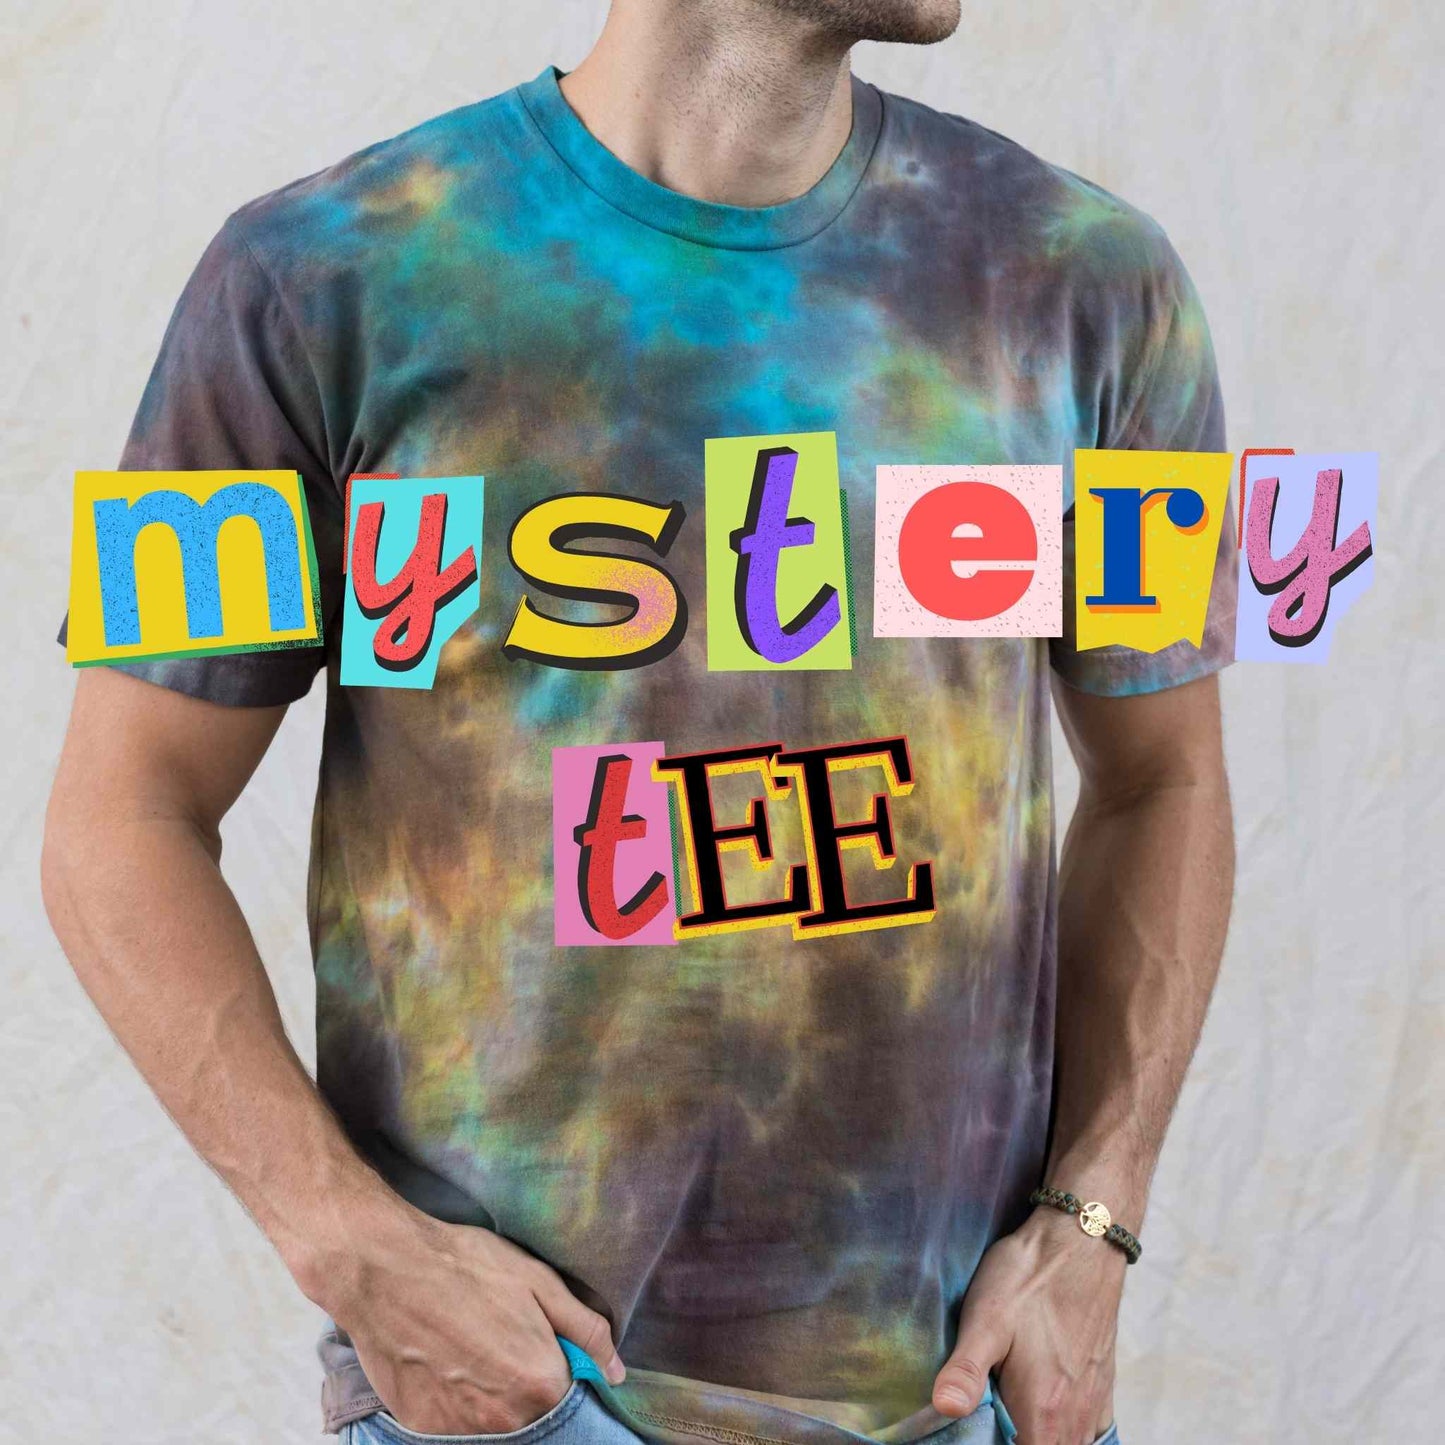 One-of-a-Kind Tie Dye Shirt – Pure 100% Cotton Tee by Masha Apparel